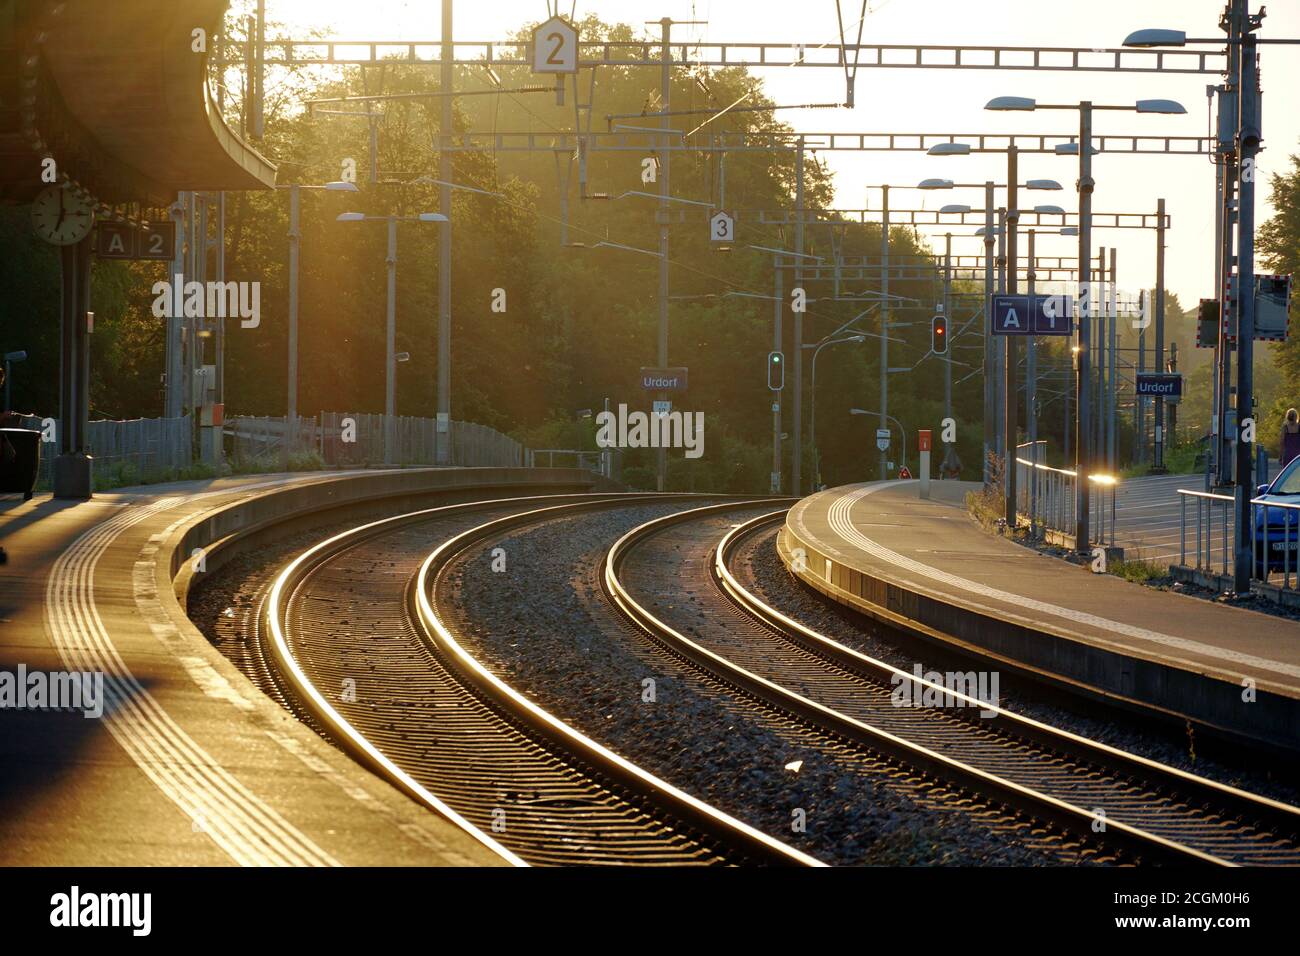 Sunrise on the train station Urdorf in summer. The light falls through trees on the rails giving them golden reflections. Stock Photo